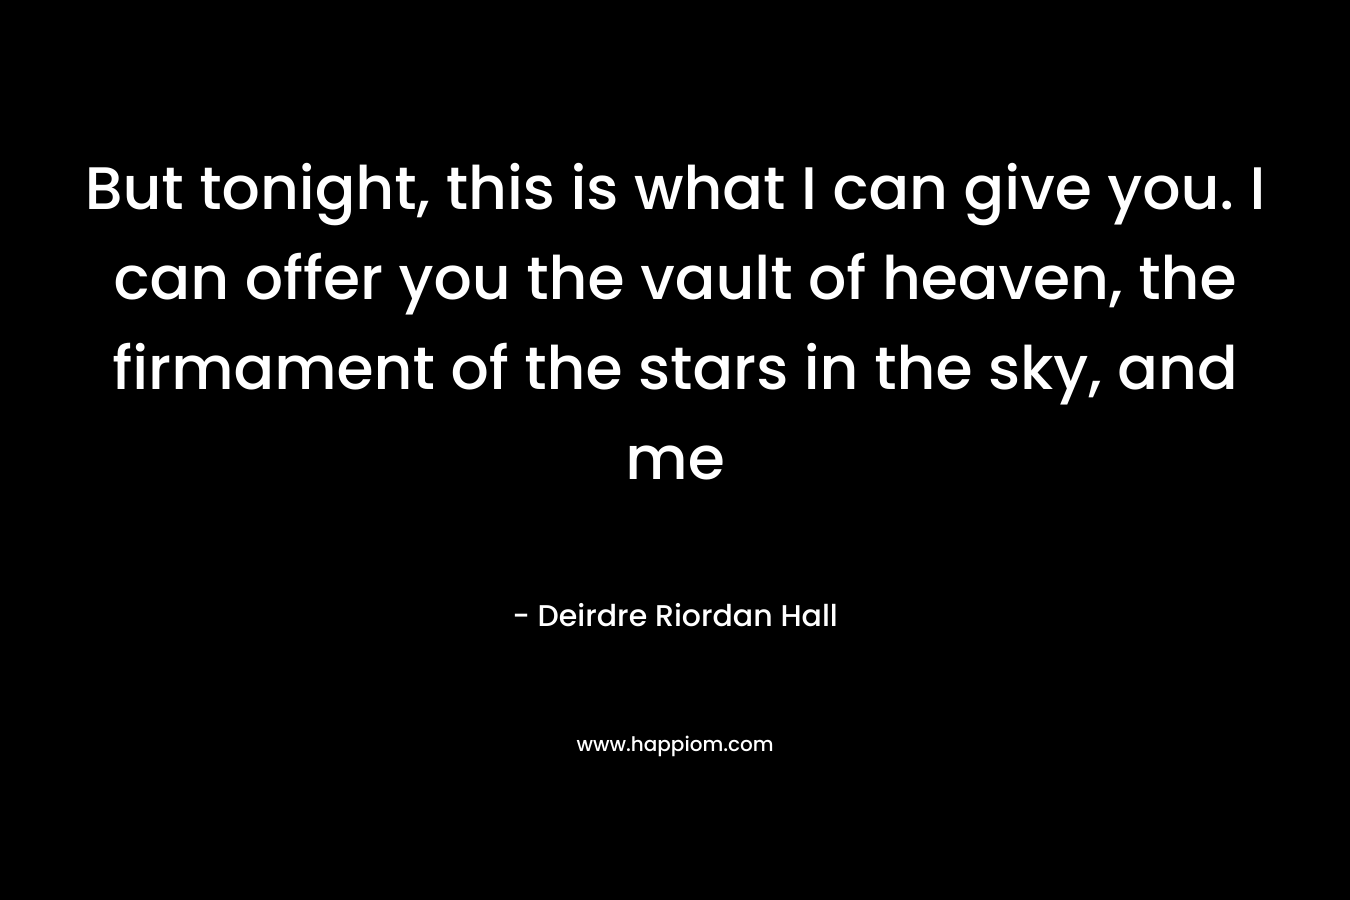 But tonight, this is what I can give you. I can offer you the vault of heaven, the firmament of the stars in the sky, and me – Deirdre Riordan Hall